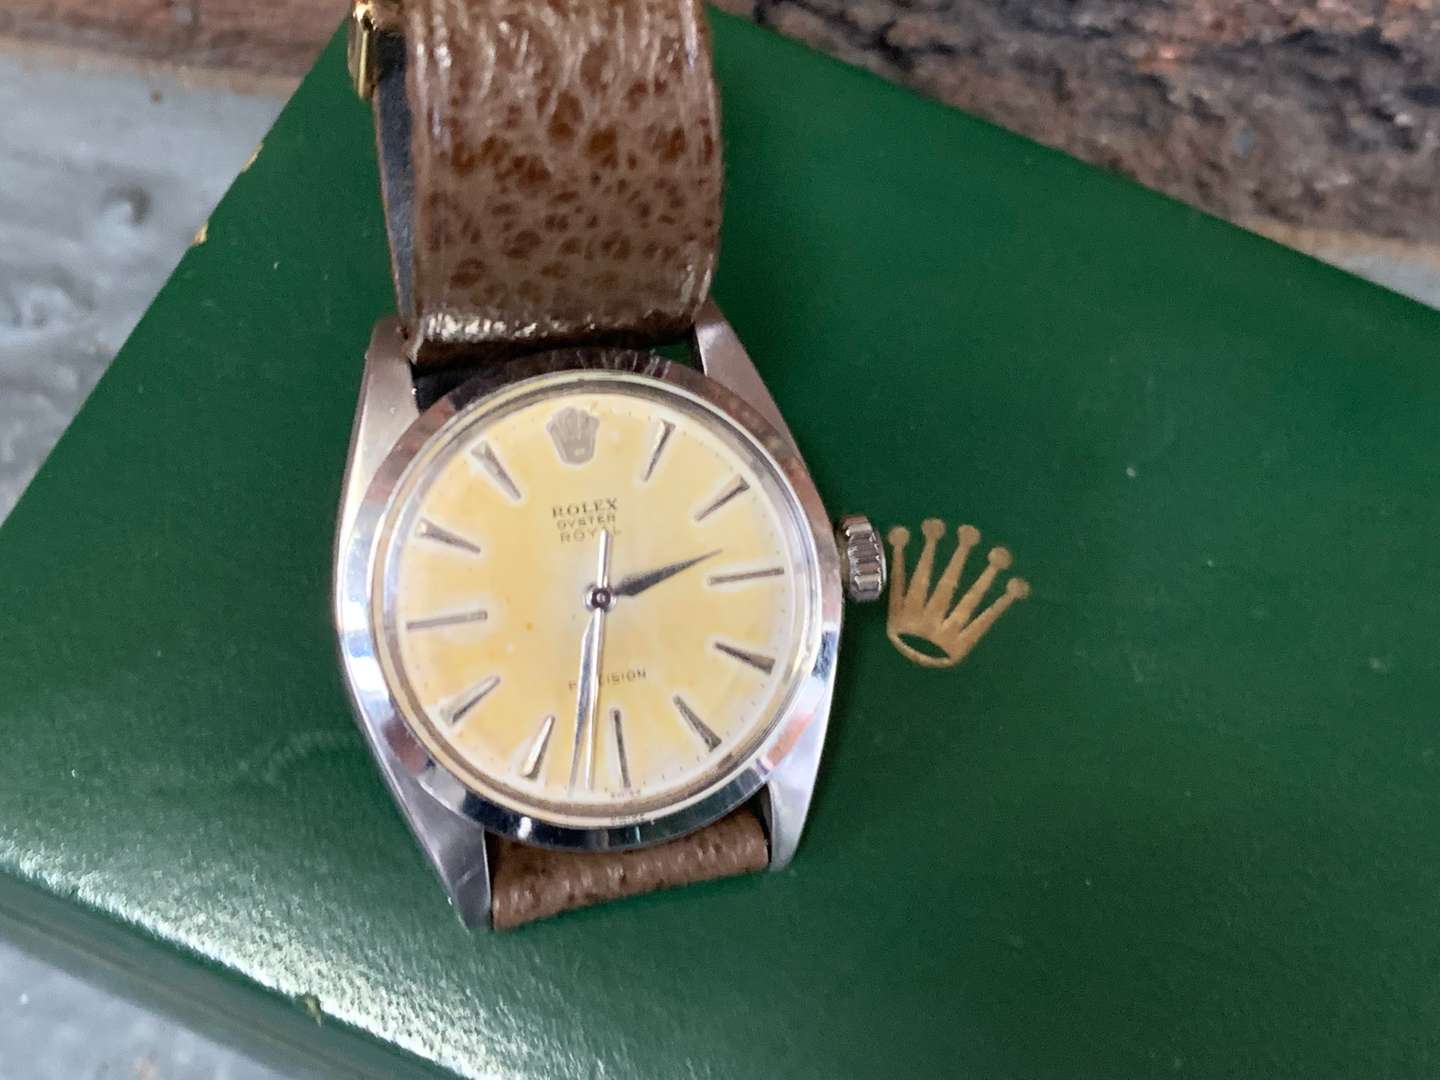 <p>1961 Boxed Manual Wind Rolex Oyster Royal Gents Wrist Watch</p>